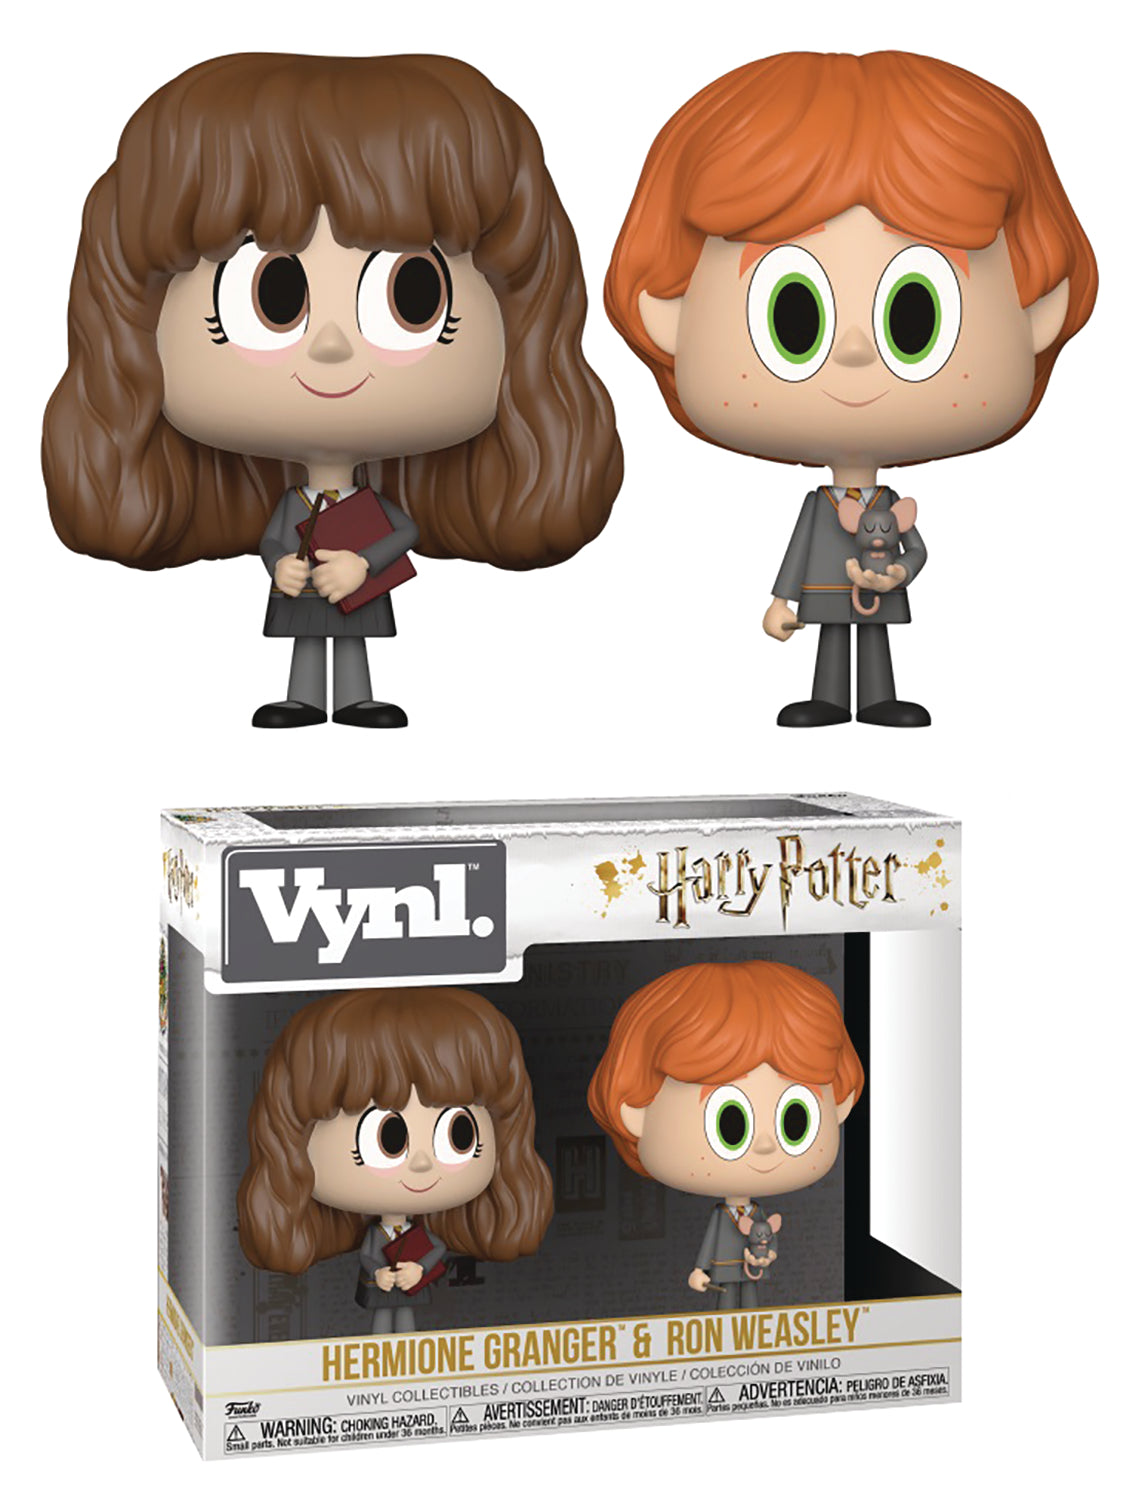 Vynl Harry Potter Ron & Hermoine Figure 2-Pack